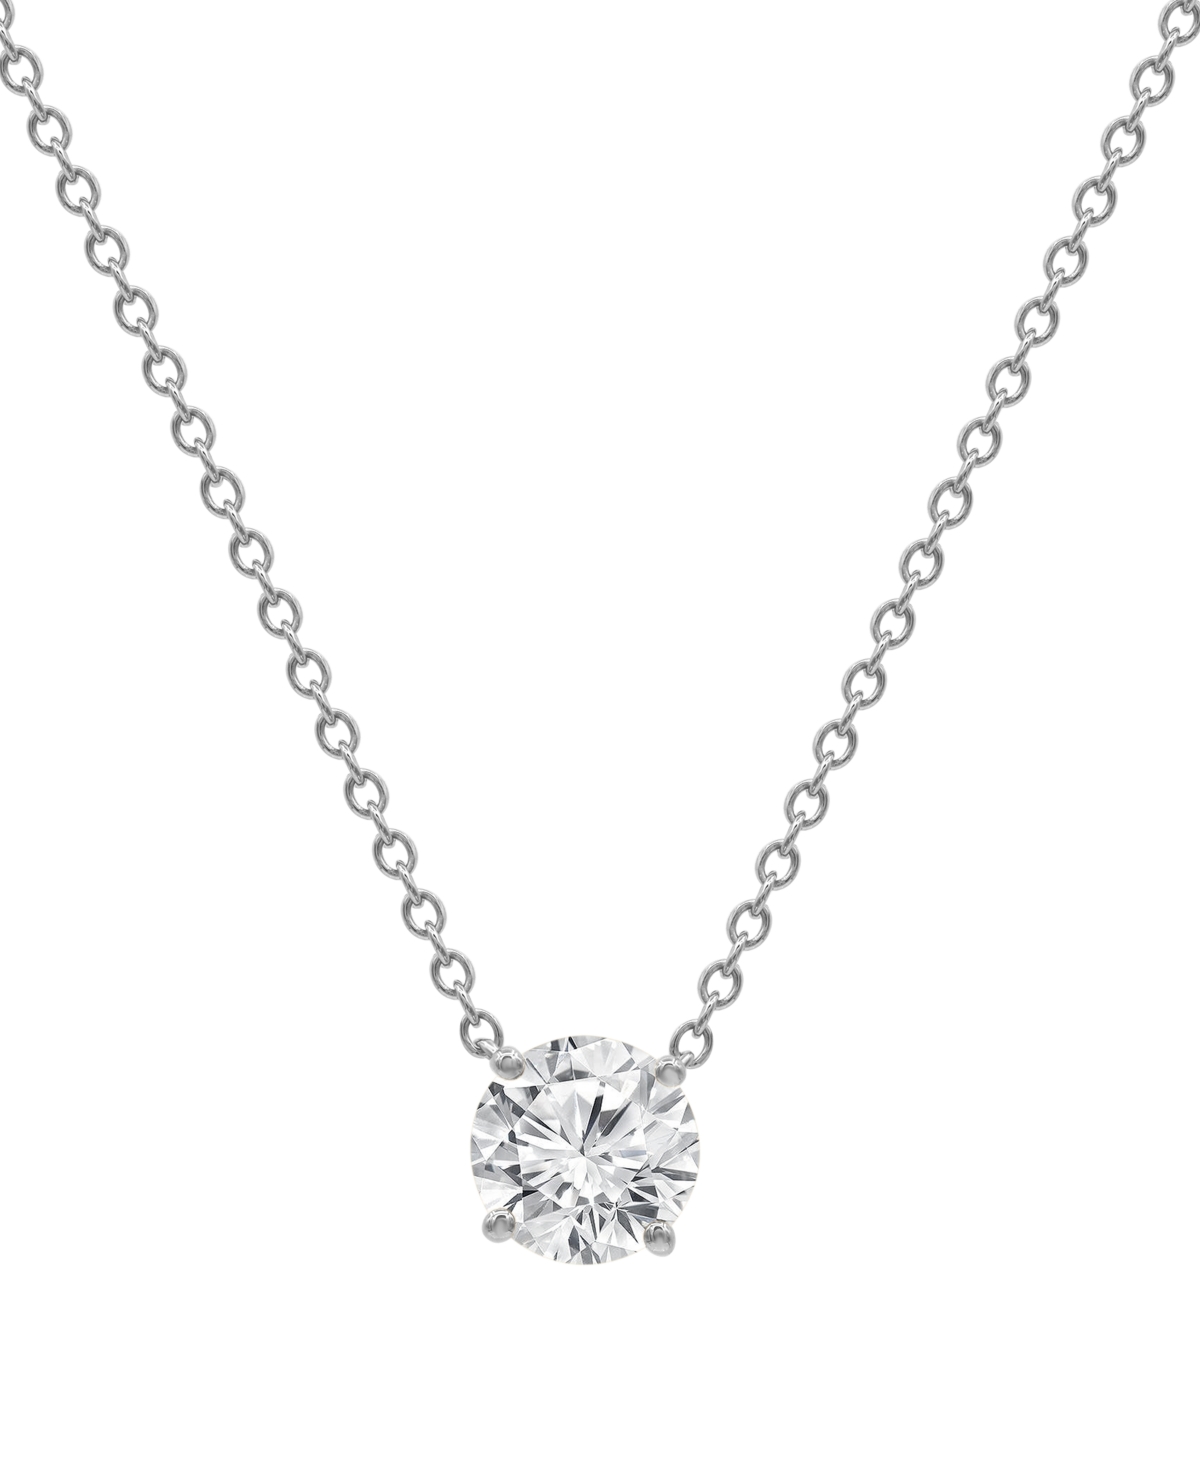 Certified Lab Grown Diamond Solitaire Pendant Necklace (1-1/2 ct. t.w.) in 14k Gold, 16" + 2" extender - Rose Gold